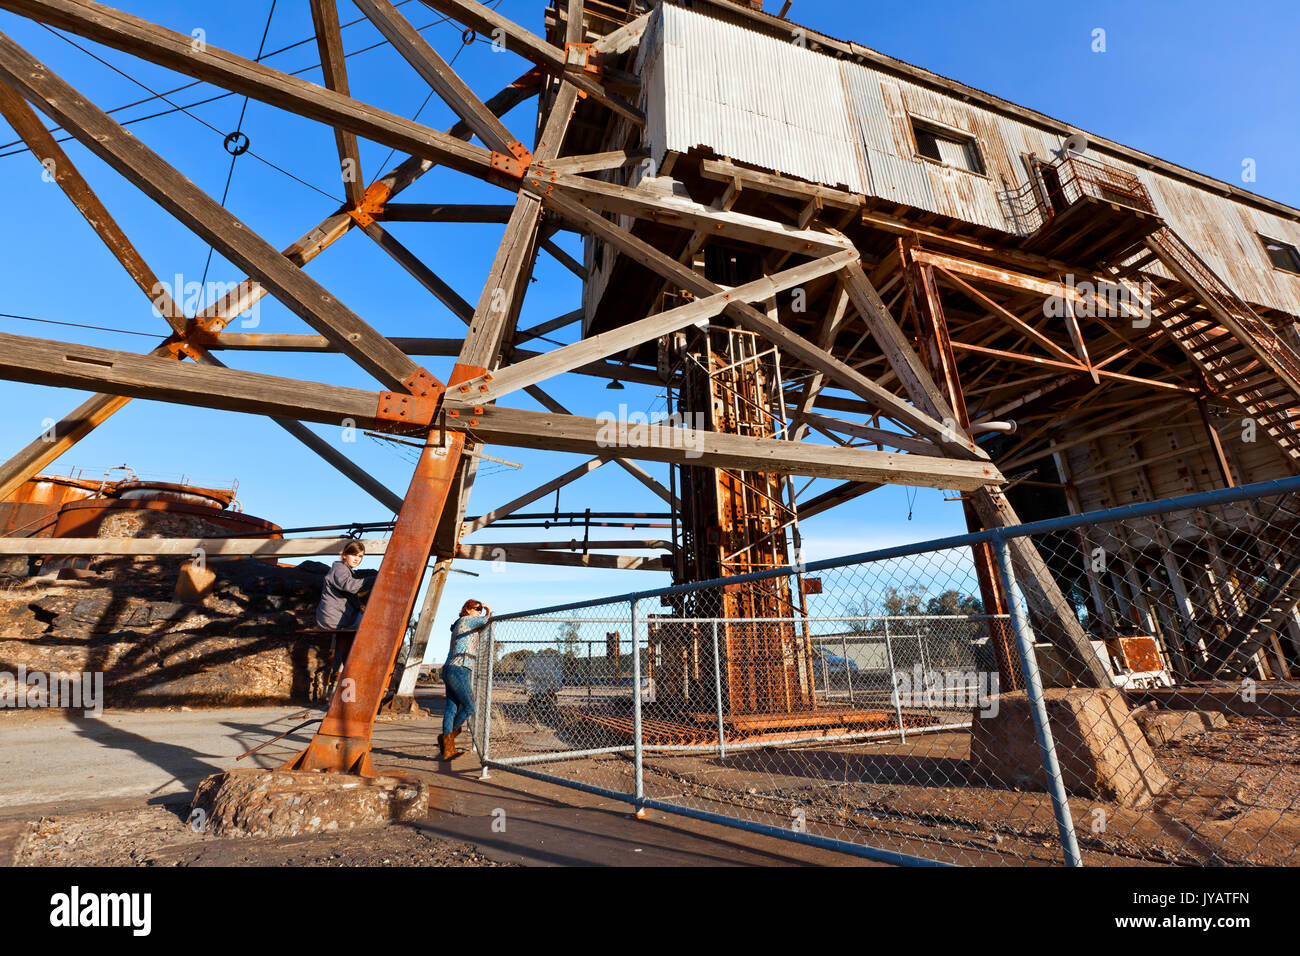 Heritage mining sites in the outback Australian city of Broken Hill in New South Wales Australia Stock Photo